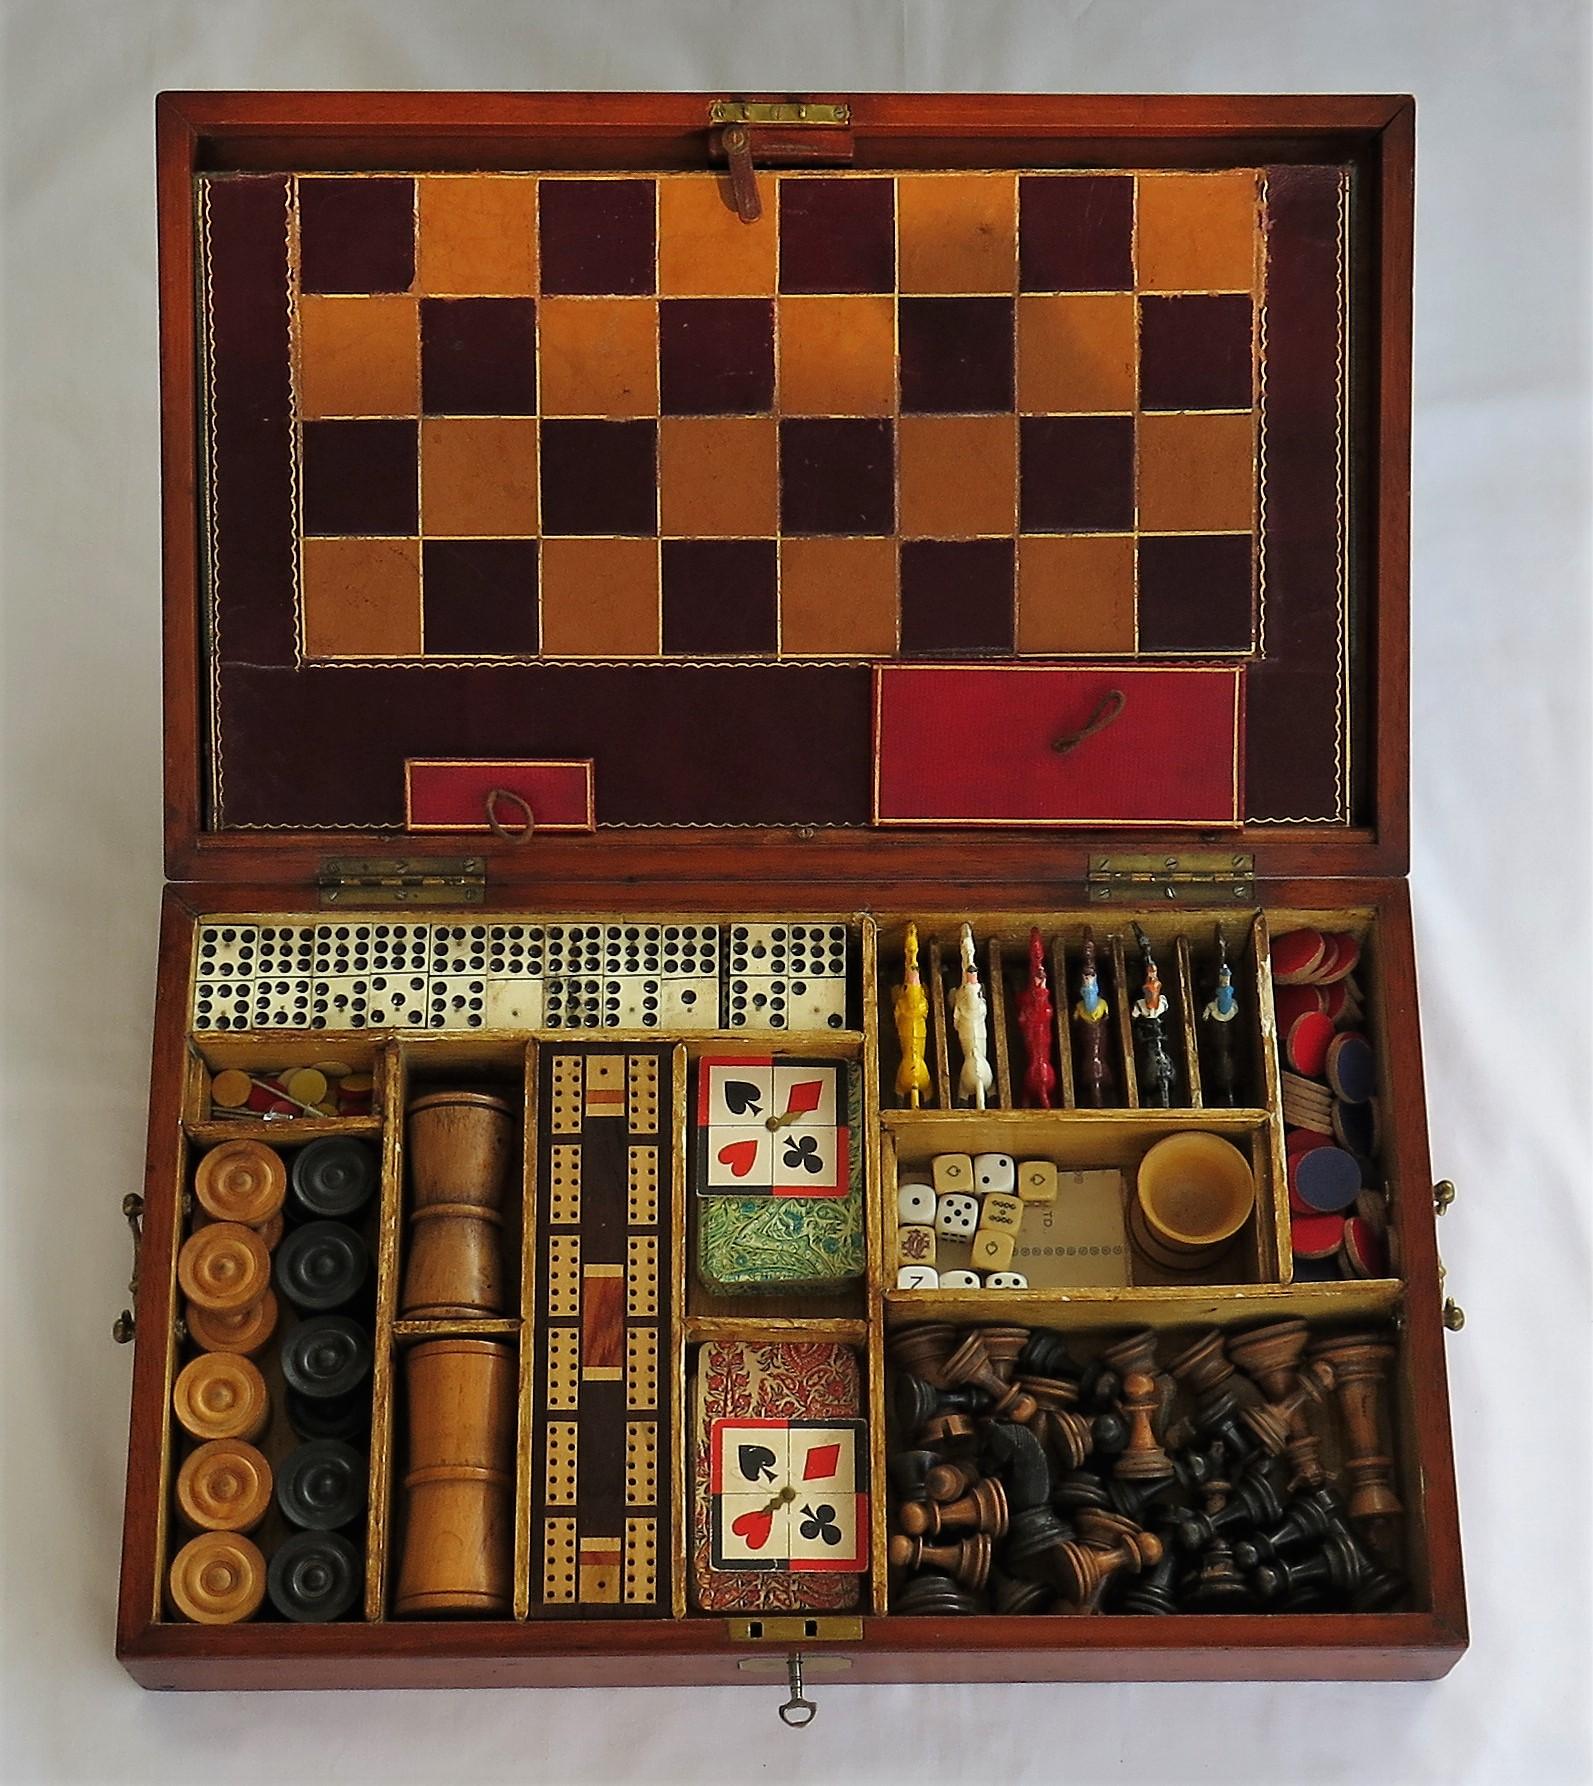 This is a high quality Games Compendium, complete with over 10 individual games in its original hardwood storage box with a hinged lid.

All the pieces are well made and complete.

The box is made of a jointed hardwood, possibly mahogany and is